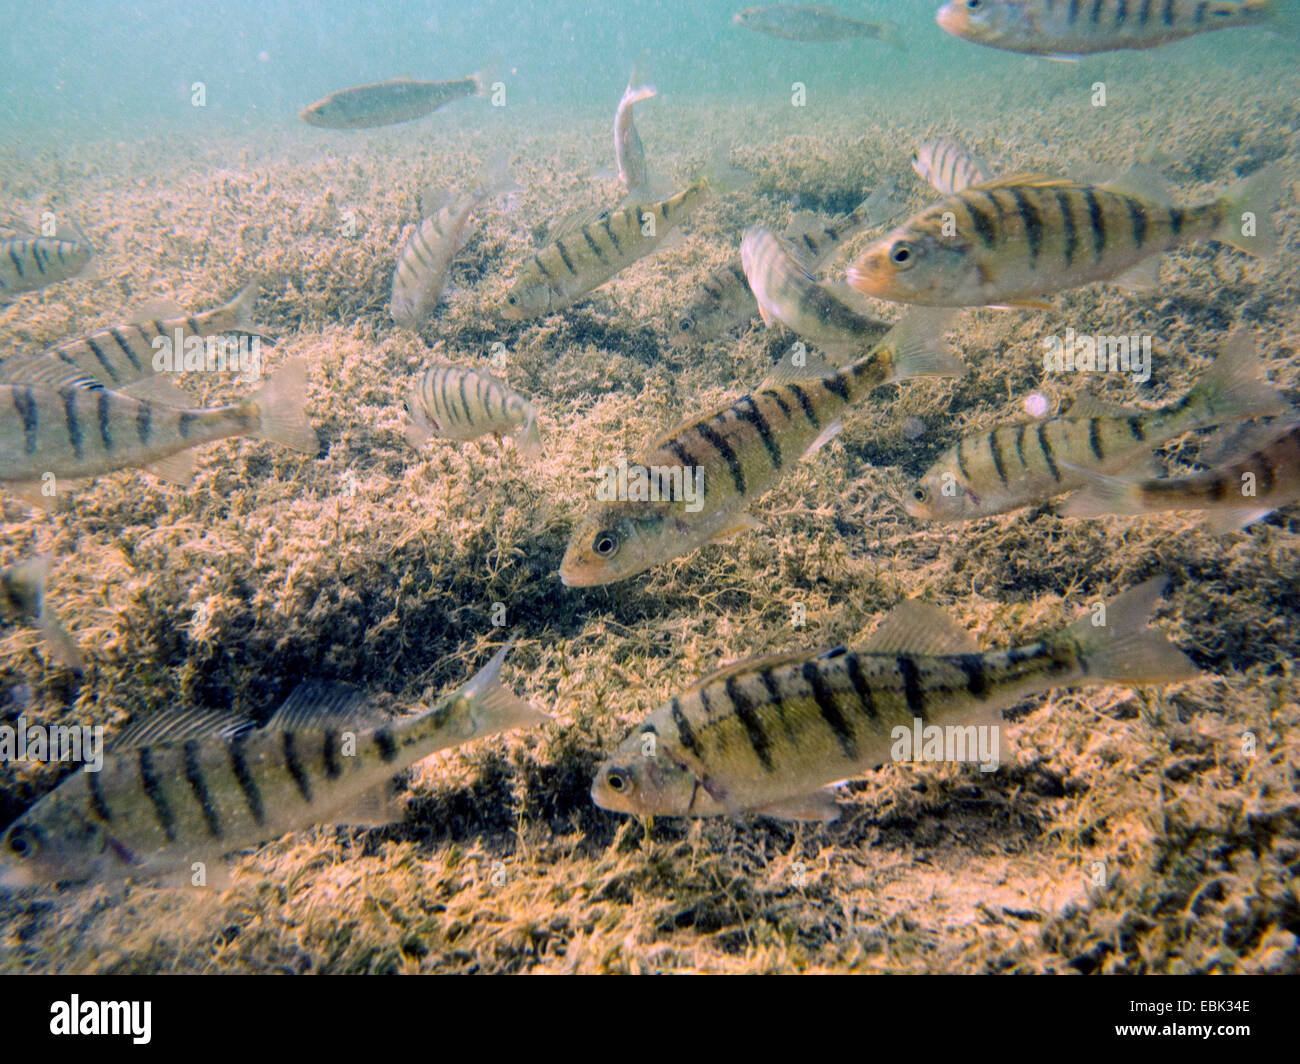 Perch, European perch, Redfin perch (Perca fluviatilis), several individuals with Characeae, Germany, Bavaria, Lake Chiemsee Stock Photo